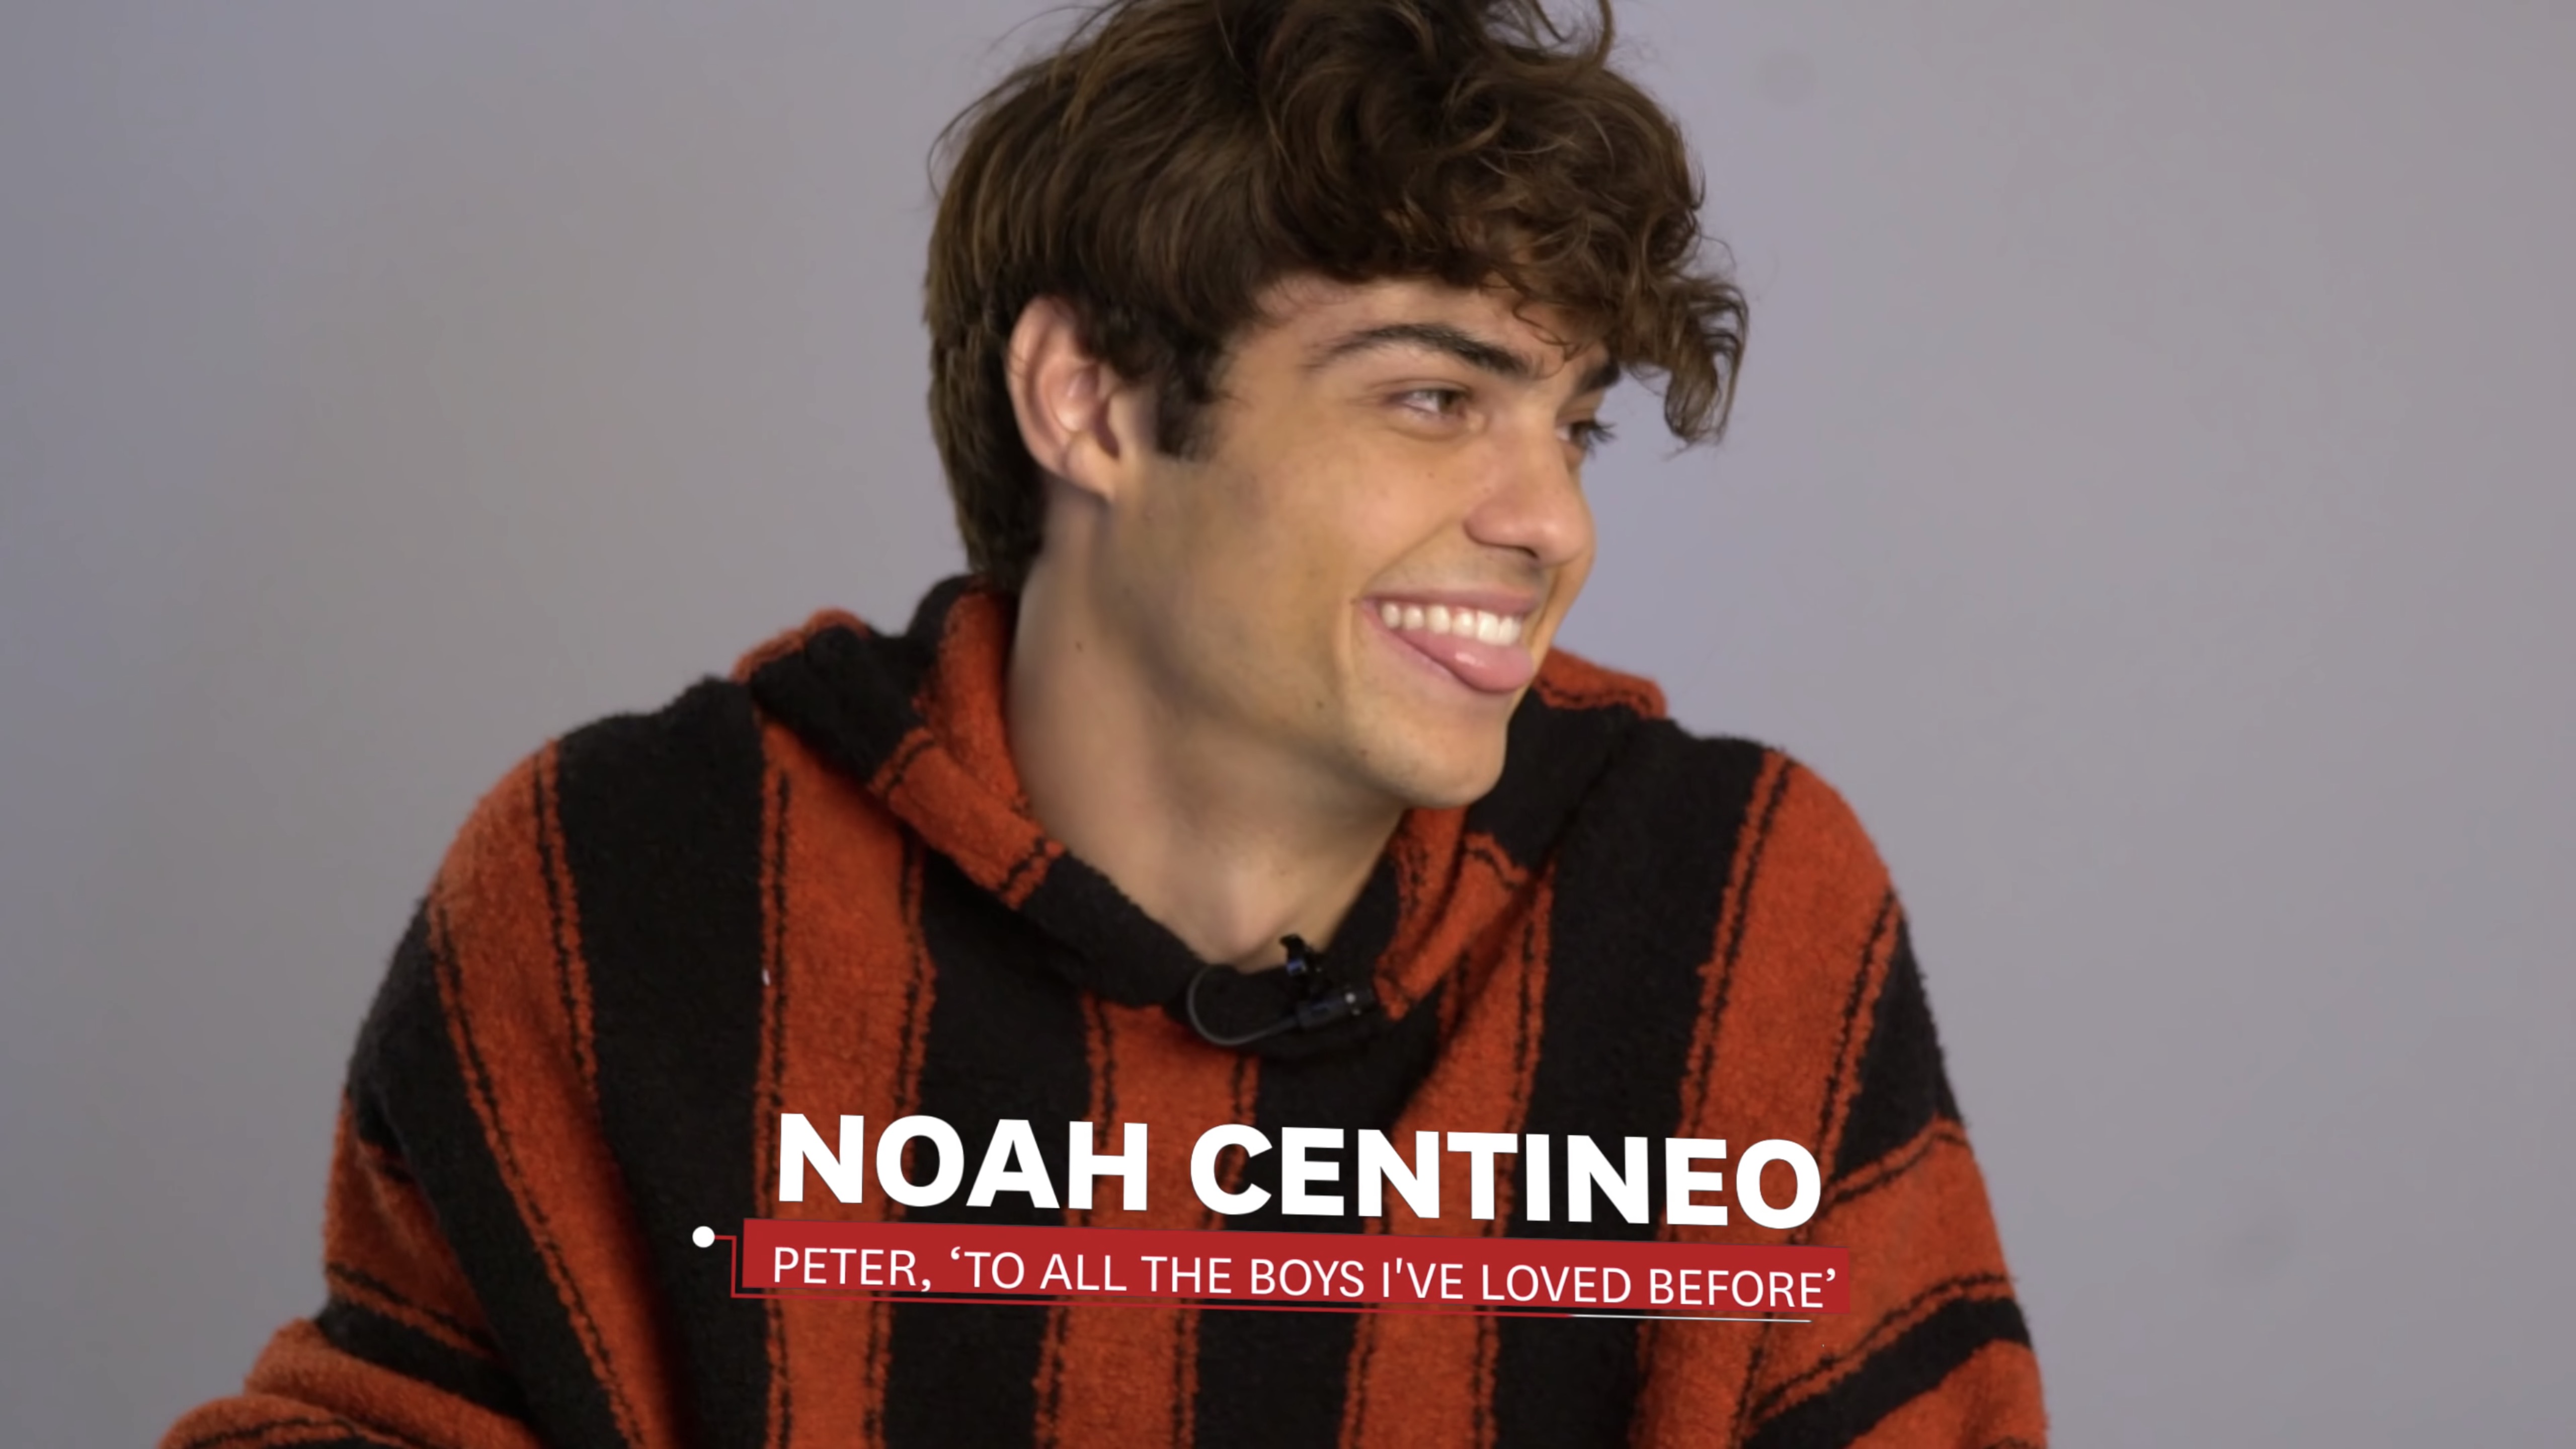 The Wrap (2018) - 000018 - Noah Centineo Photo Gallery.